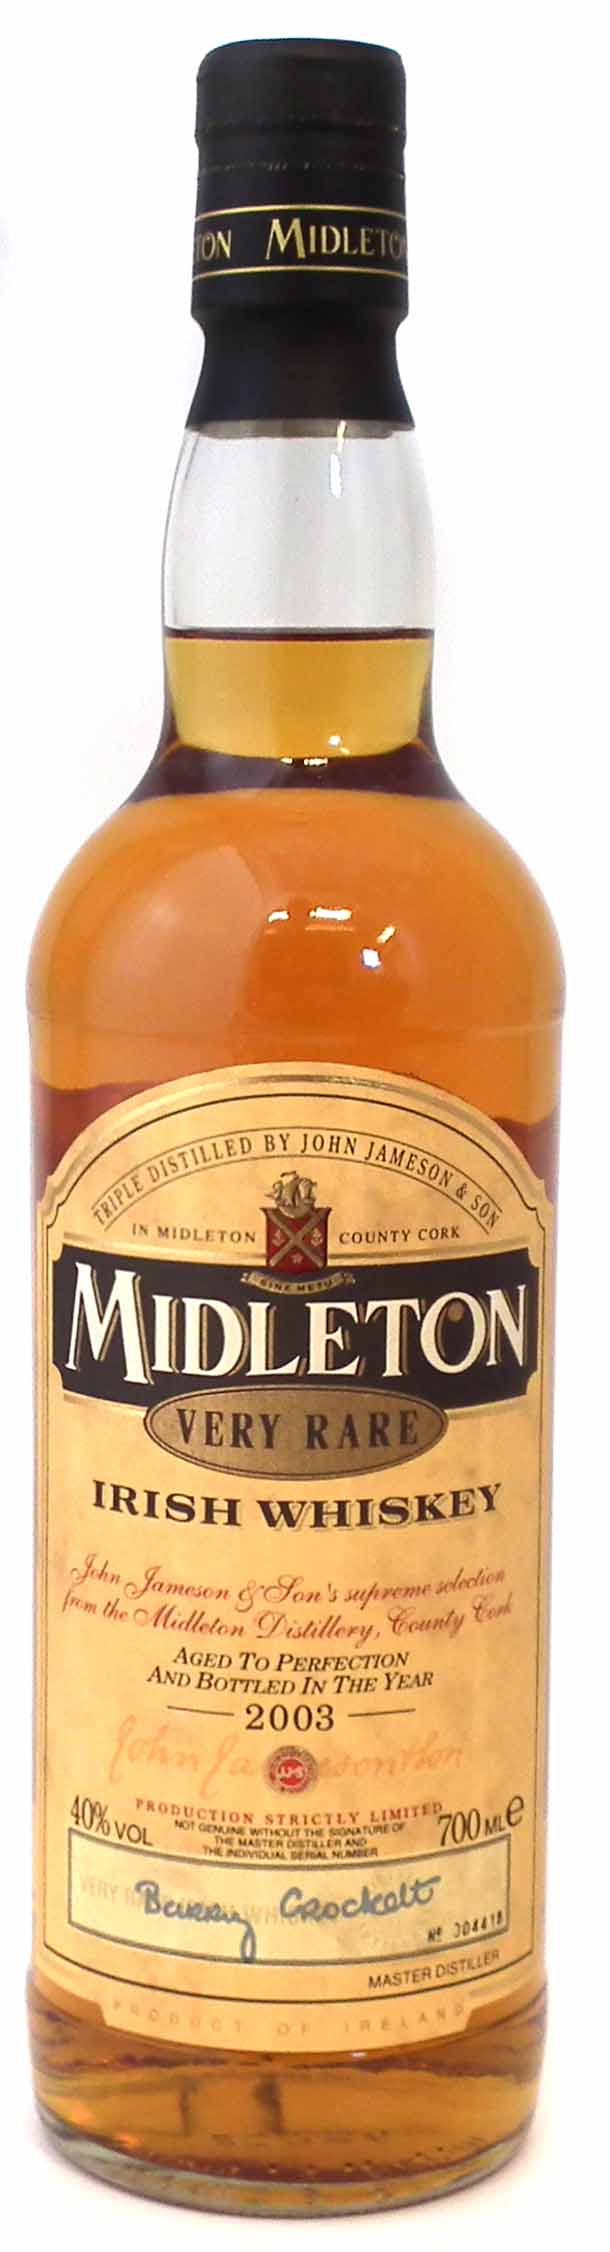 Midleton Very Rare Irish Whiskey - 2003 - 700ml number 4418 with wood box, certificate and - Image 6 of 6